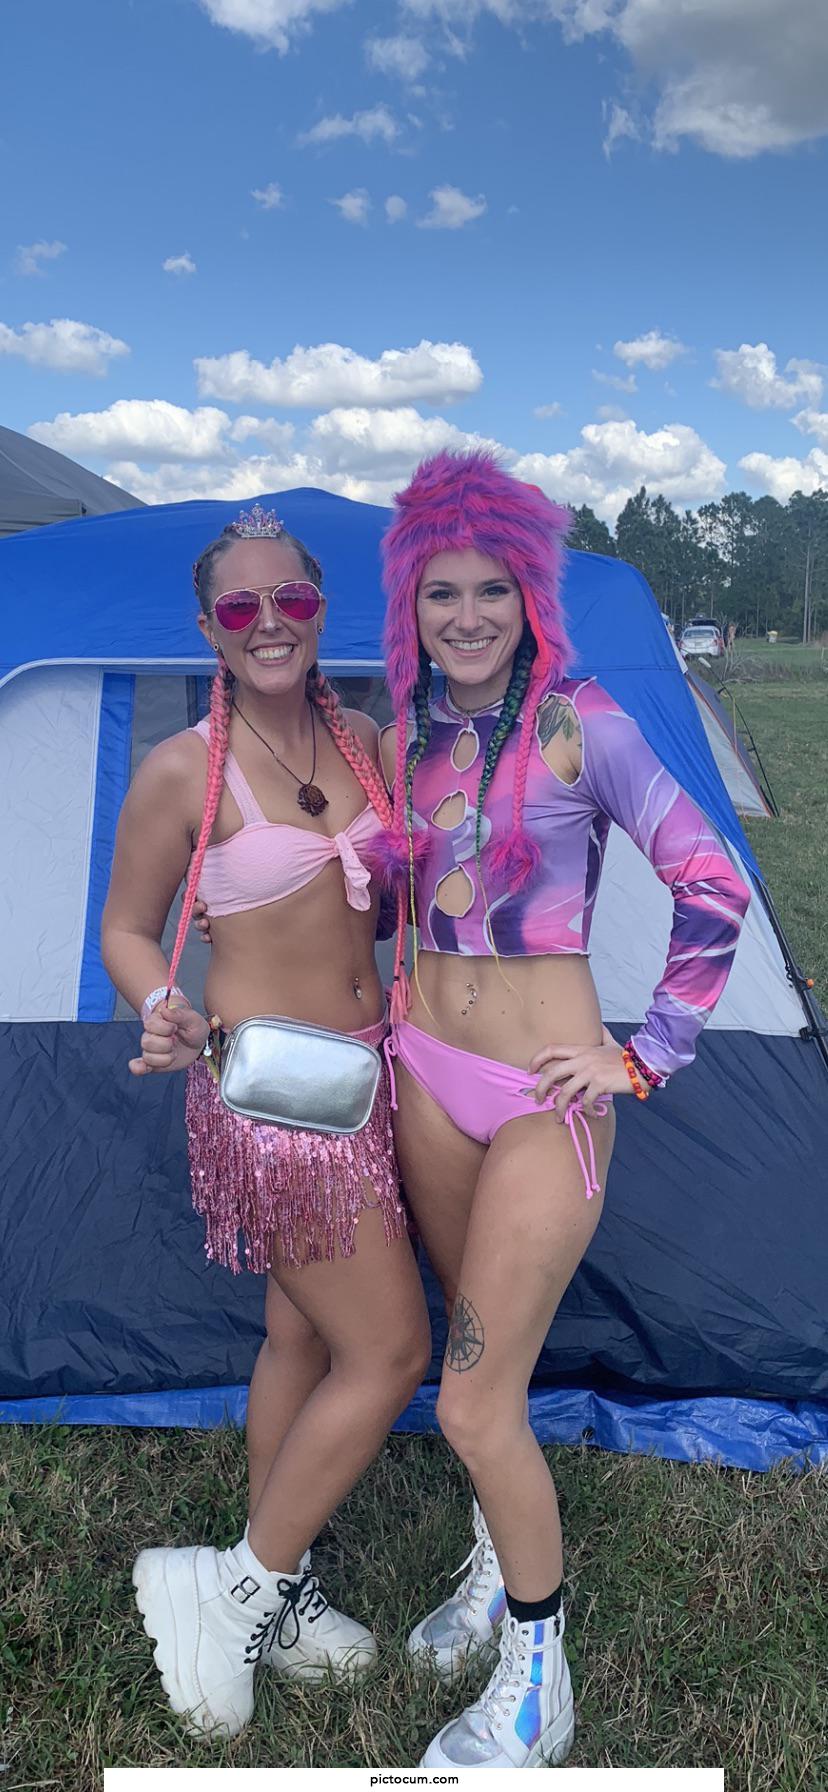 I’m a slut for Okeechobee. Who all was there